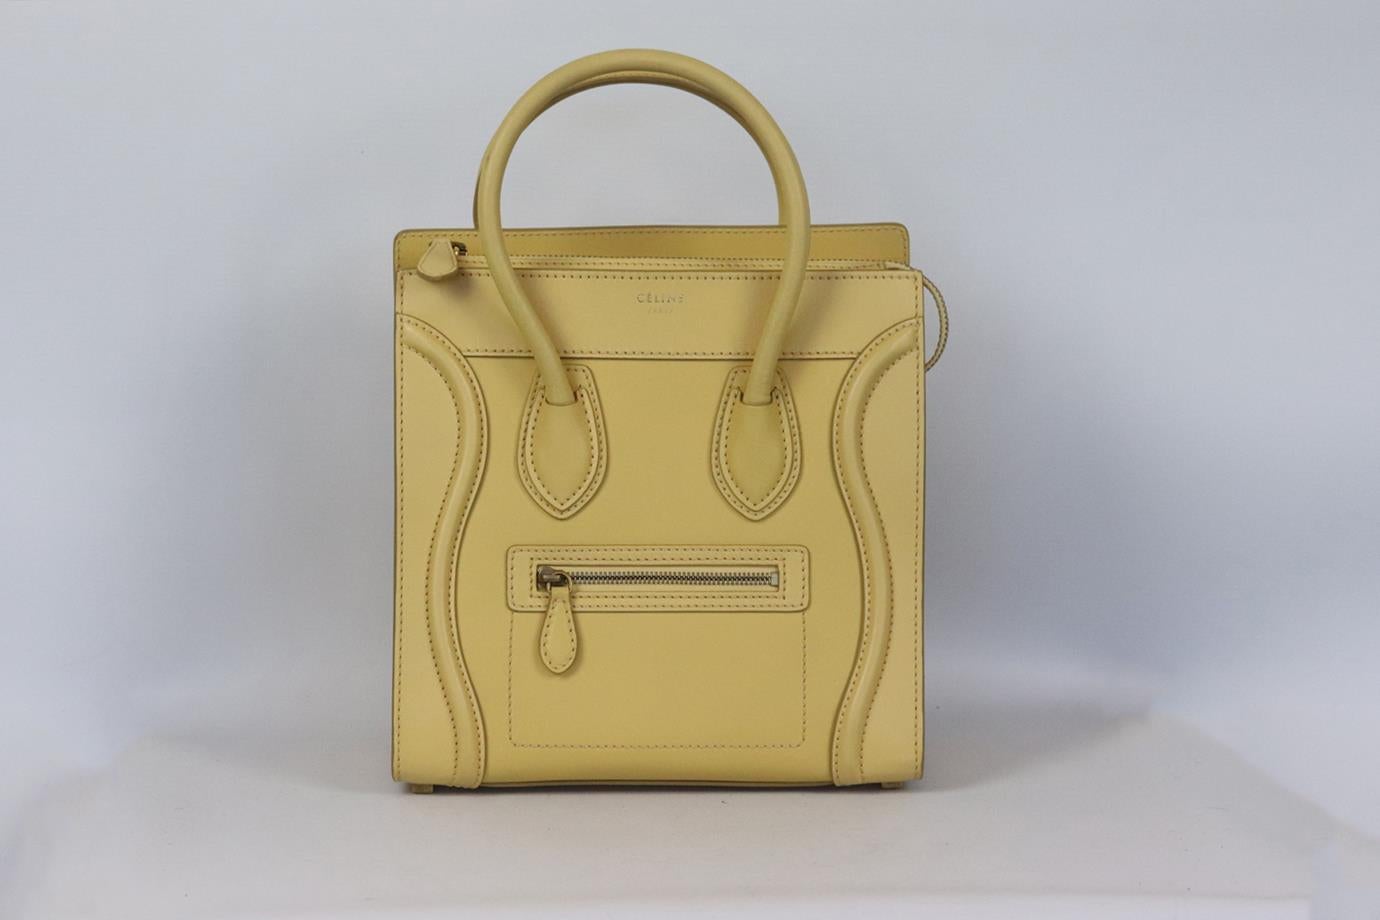 Celine Luggage micro leather tote bag. Yellow and beige. Zip fastening at top. Does not come with dustbag or box. Height: 10.5 in. Width: 10.3 in. Depth: 5.4 in. Handle Drop: 4.5 in. Very good condition - Two light marks to base. Some scratching to